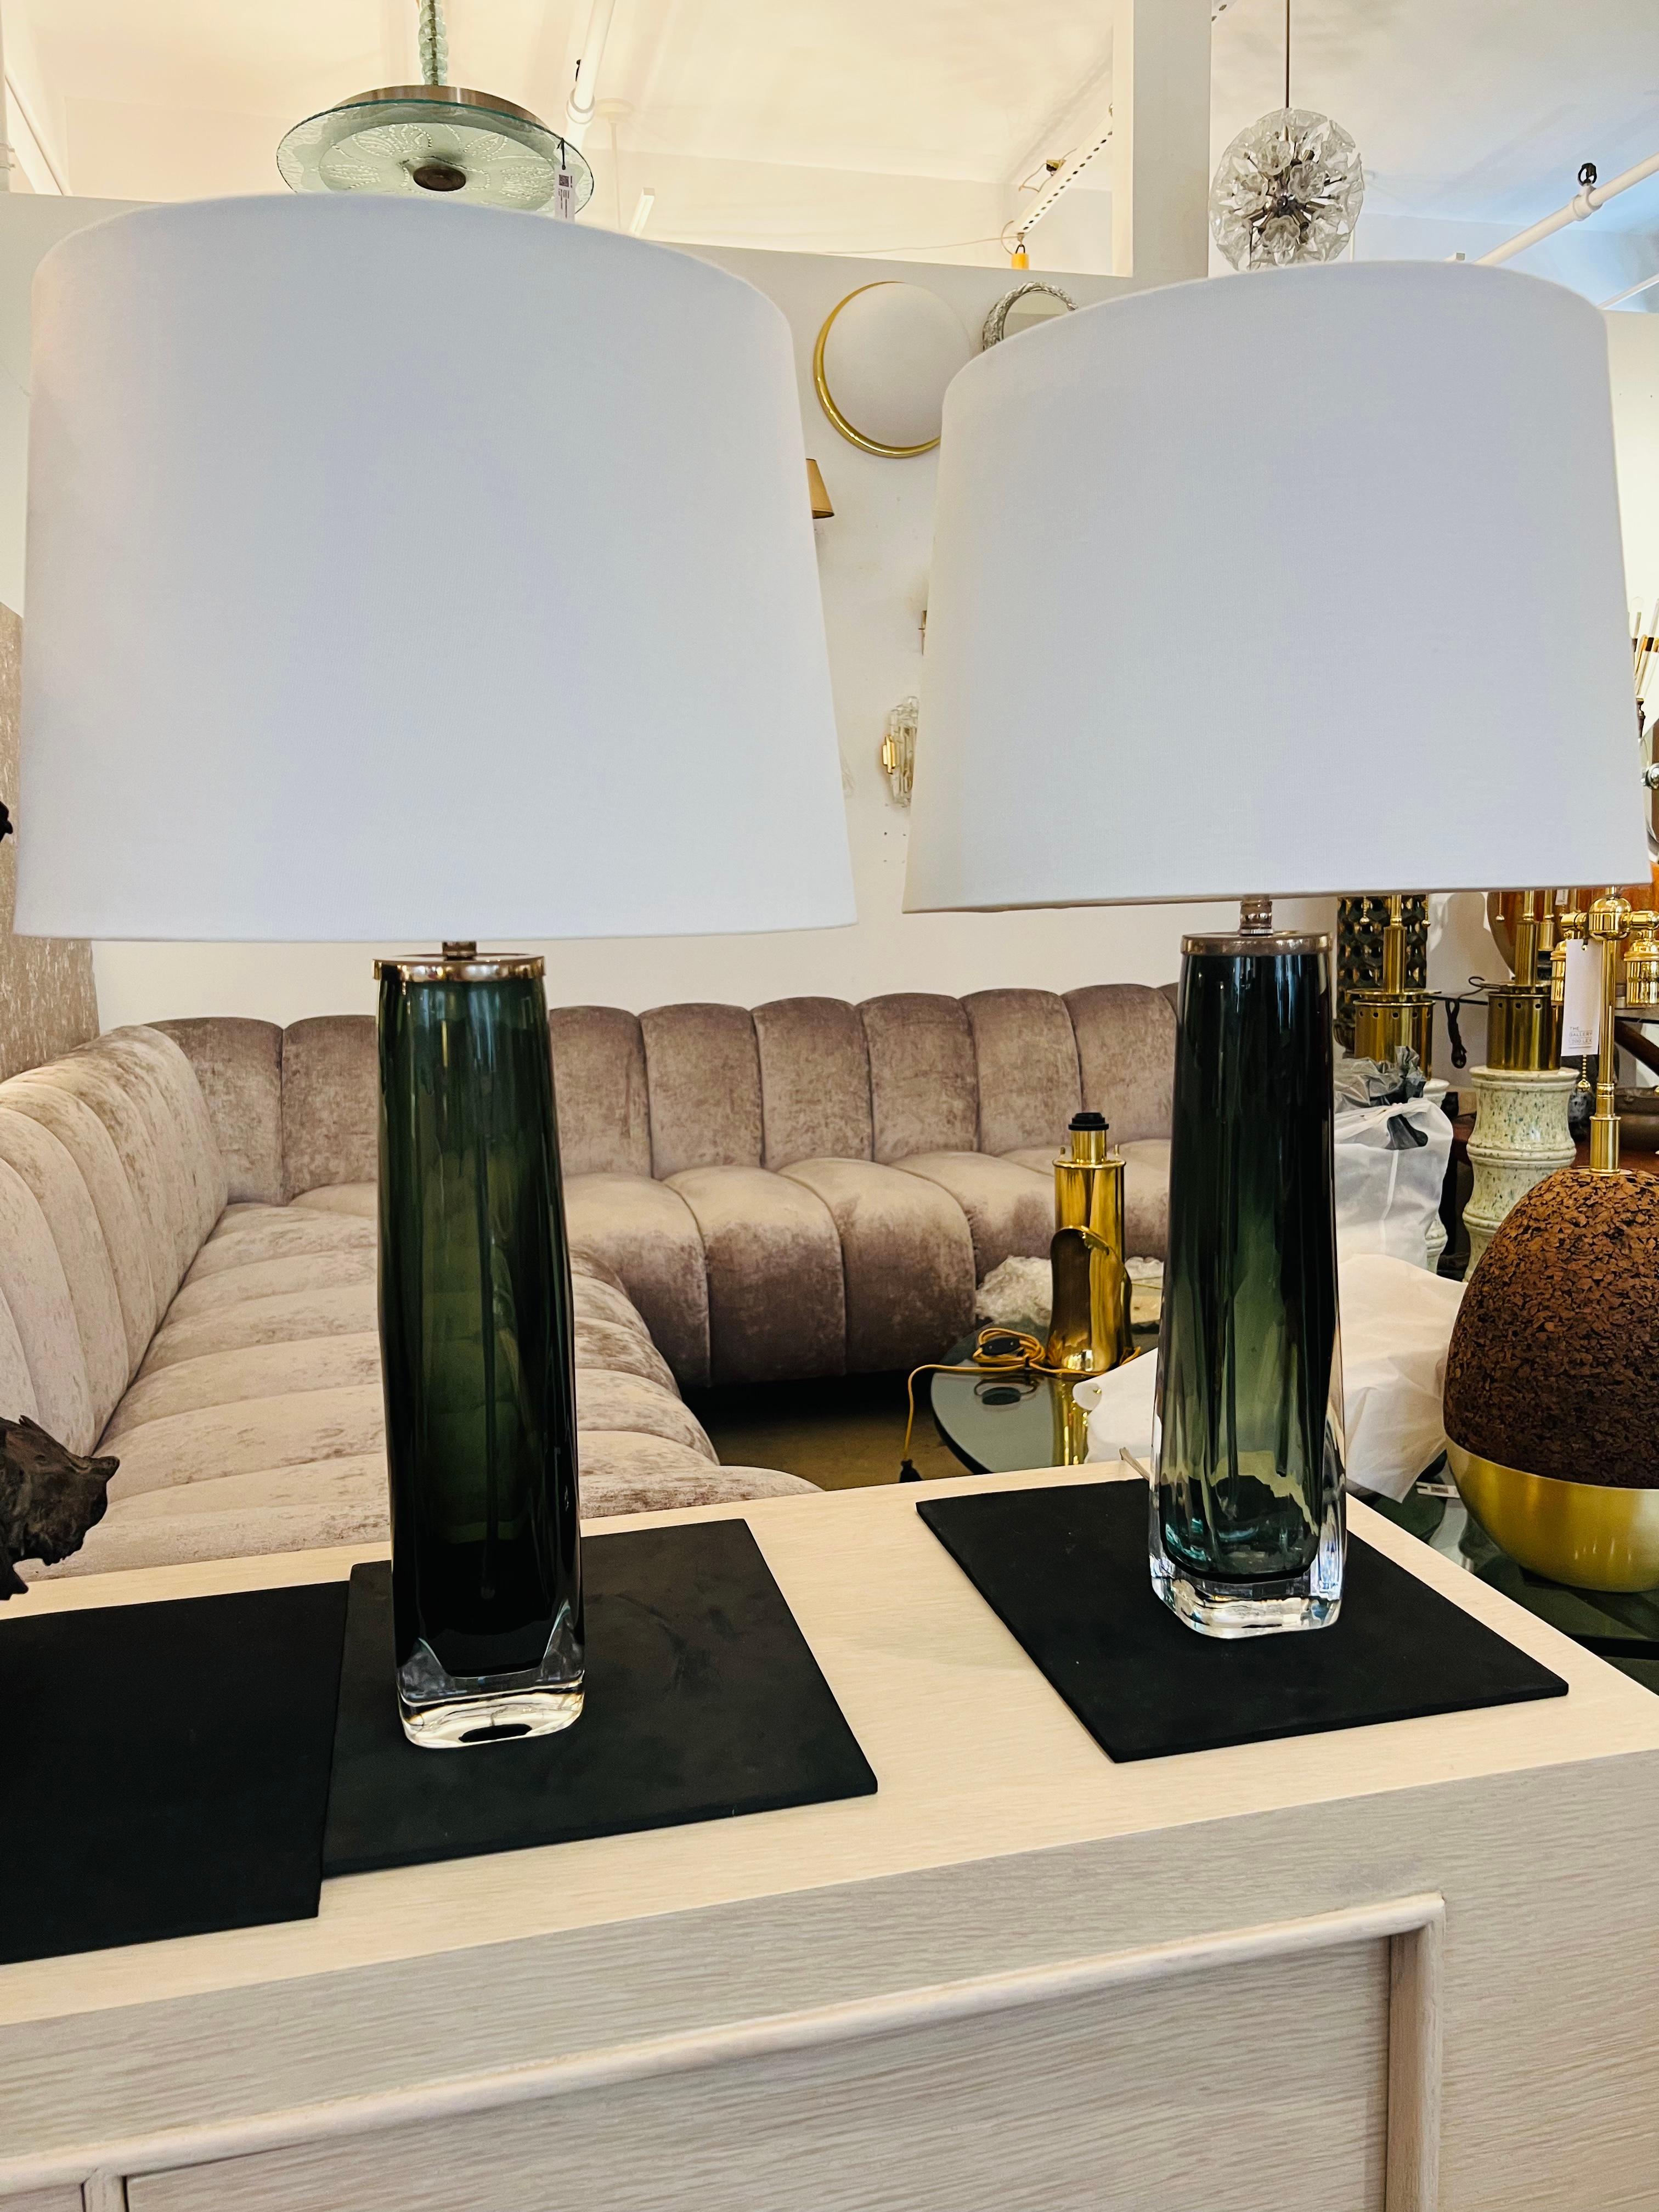 Pair of beautiful large dark green crystal table lamps with new polished nickel double cluster sockets Ny Carl Fagerlund for Orrefors.
Original label. 
Newly rewired with two standard sockets each.